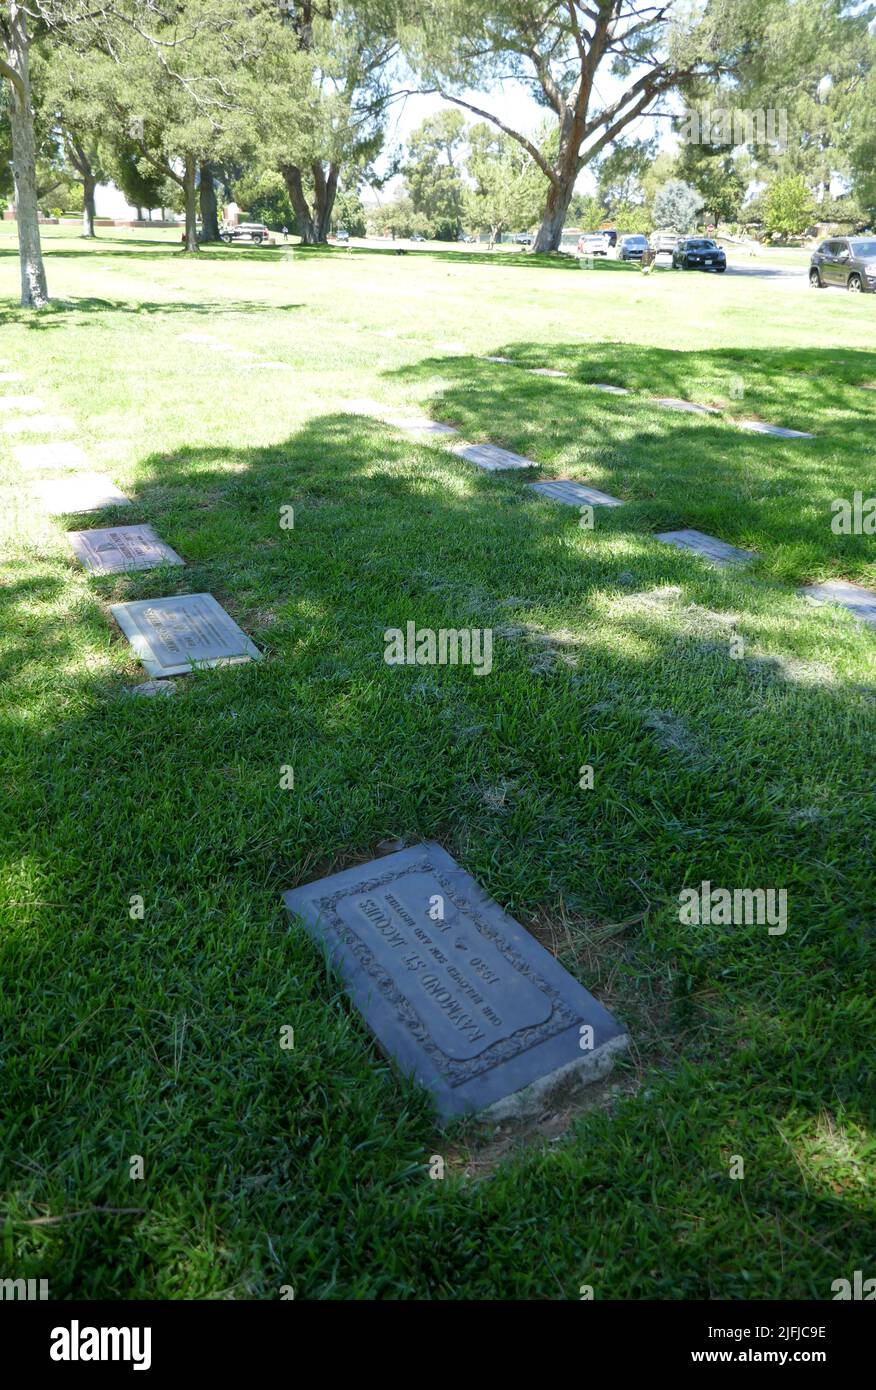 Los Angeles, California, USA 19th June 2022 Actor Raymond St. Jacques Grave in Eternal Love Section at Forest Lawn Memorial Park Hollywood Hills on June 19, 2022 in Los Angeles, California, USA. Photo by Barry King/Alamy Stock Photo Stock Photo